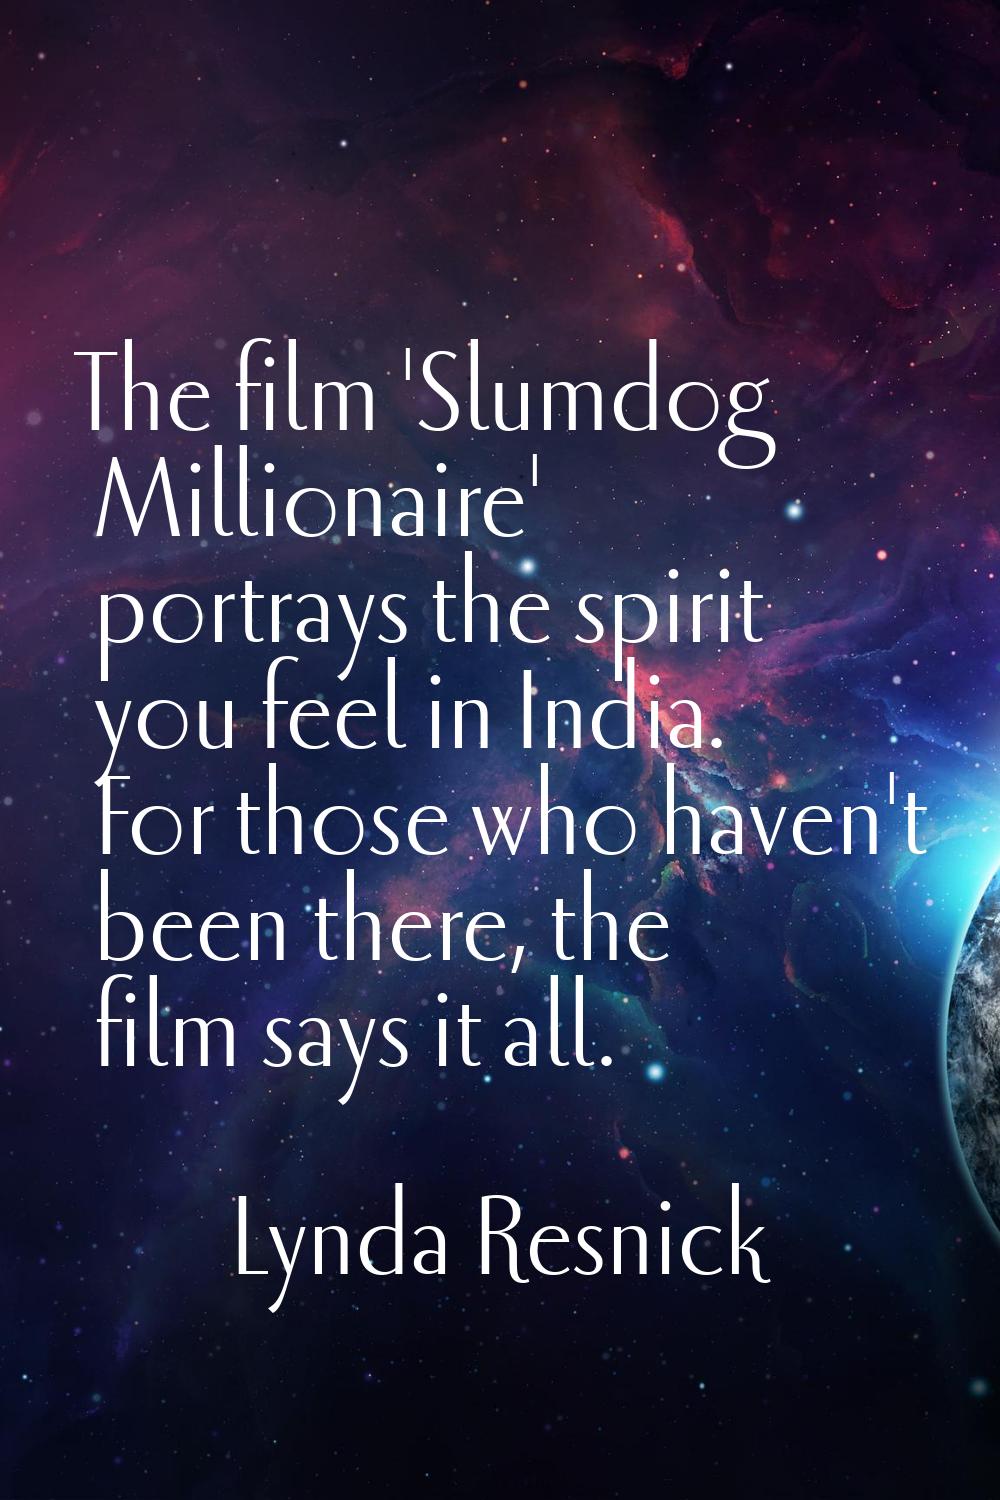 The film 'Slumdog Millionaire' portrays the spirit you feel in India. For those who haven't been th